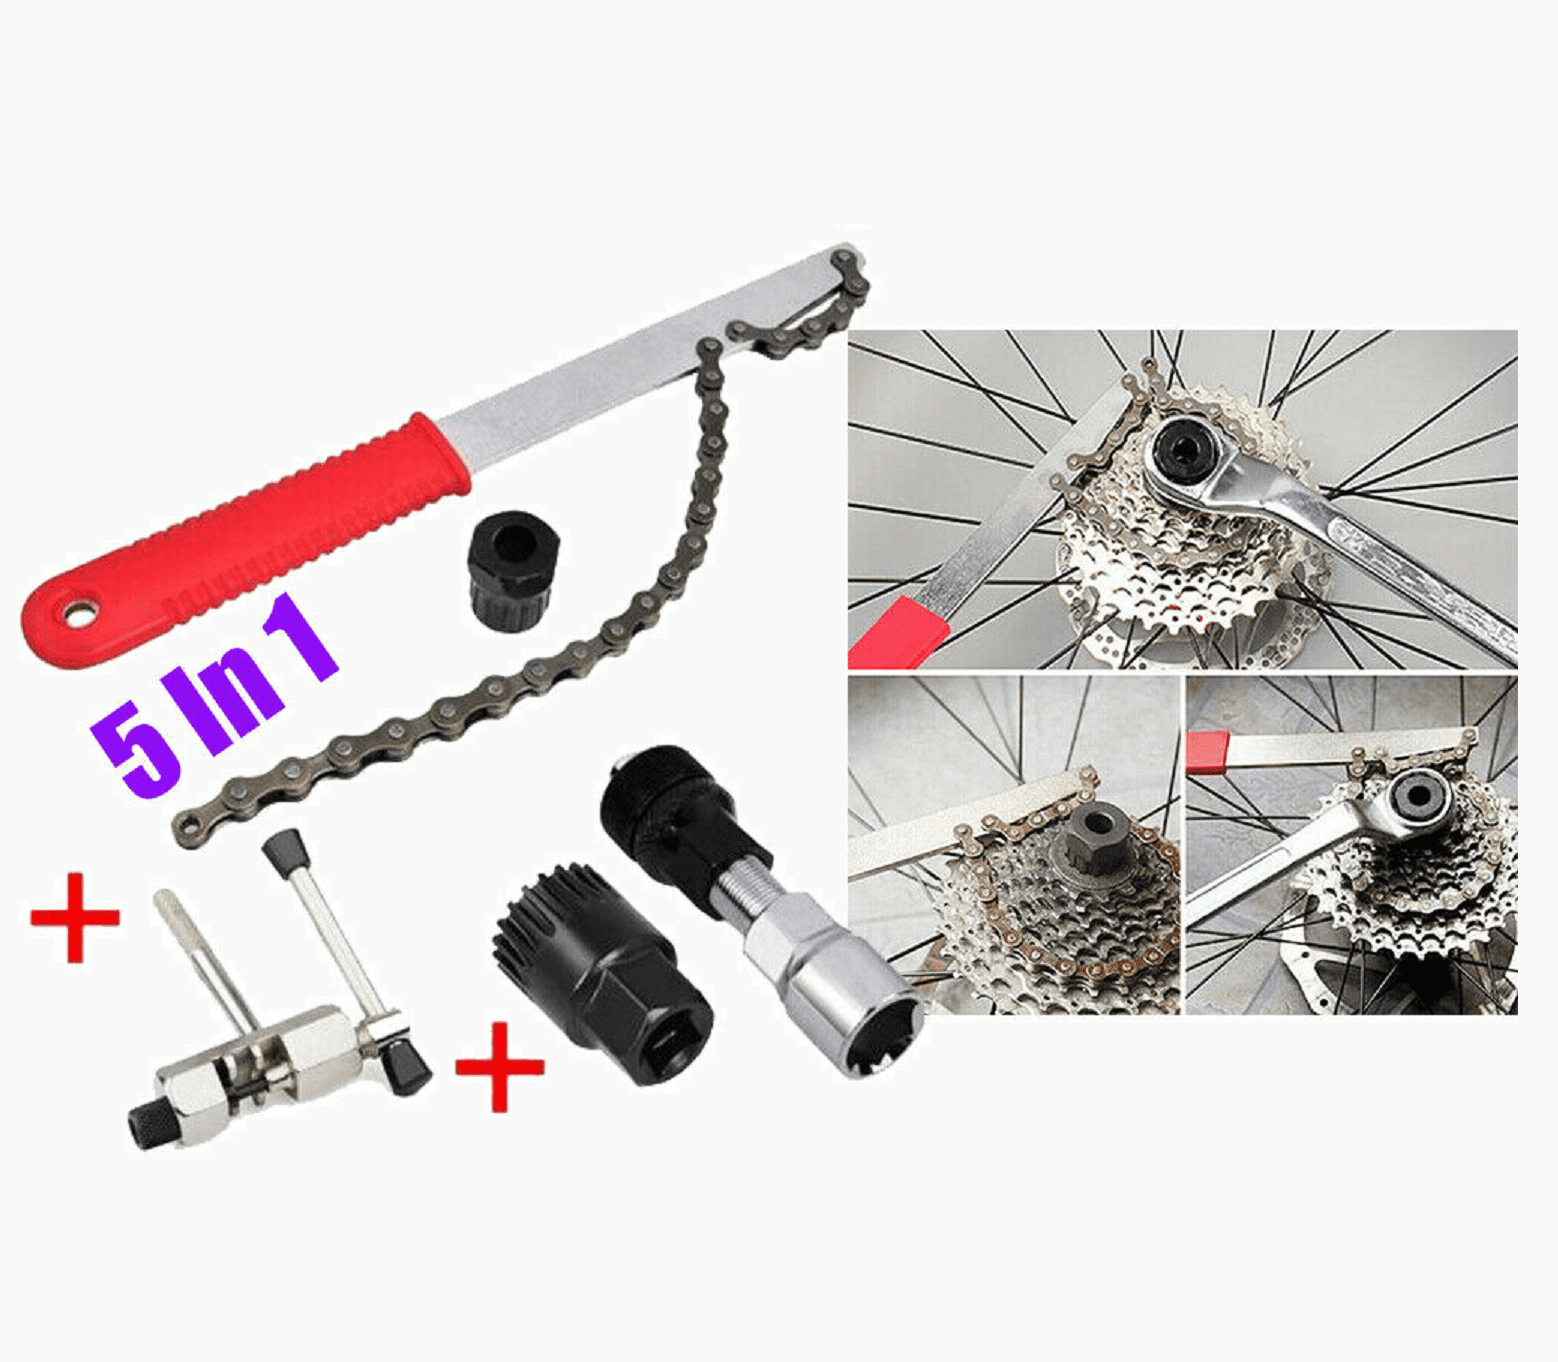 Details about   MTB Road Bike Disassembly Chain Whip Crankset Sprocket Remover Repair Wrench Kit 